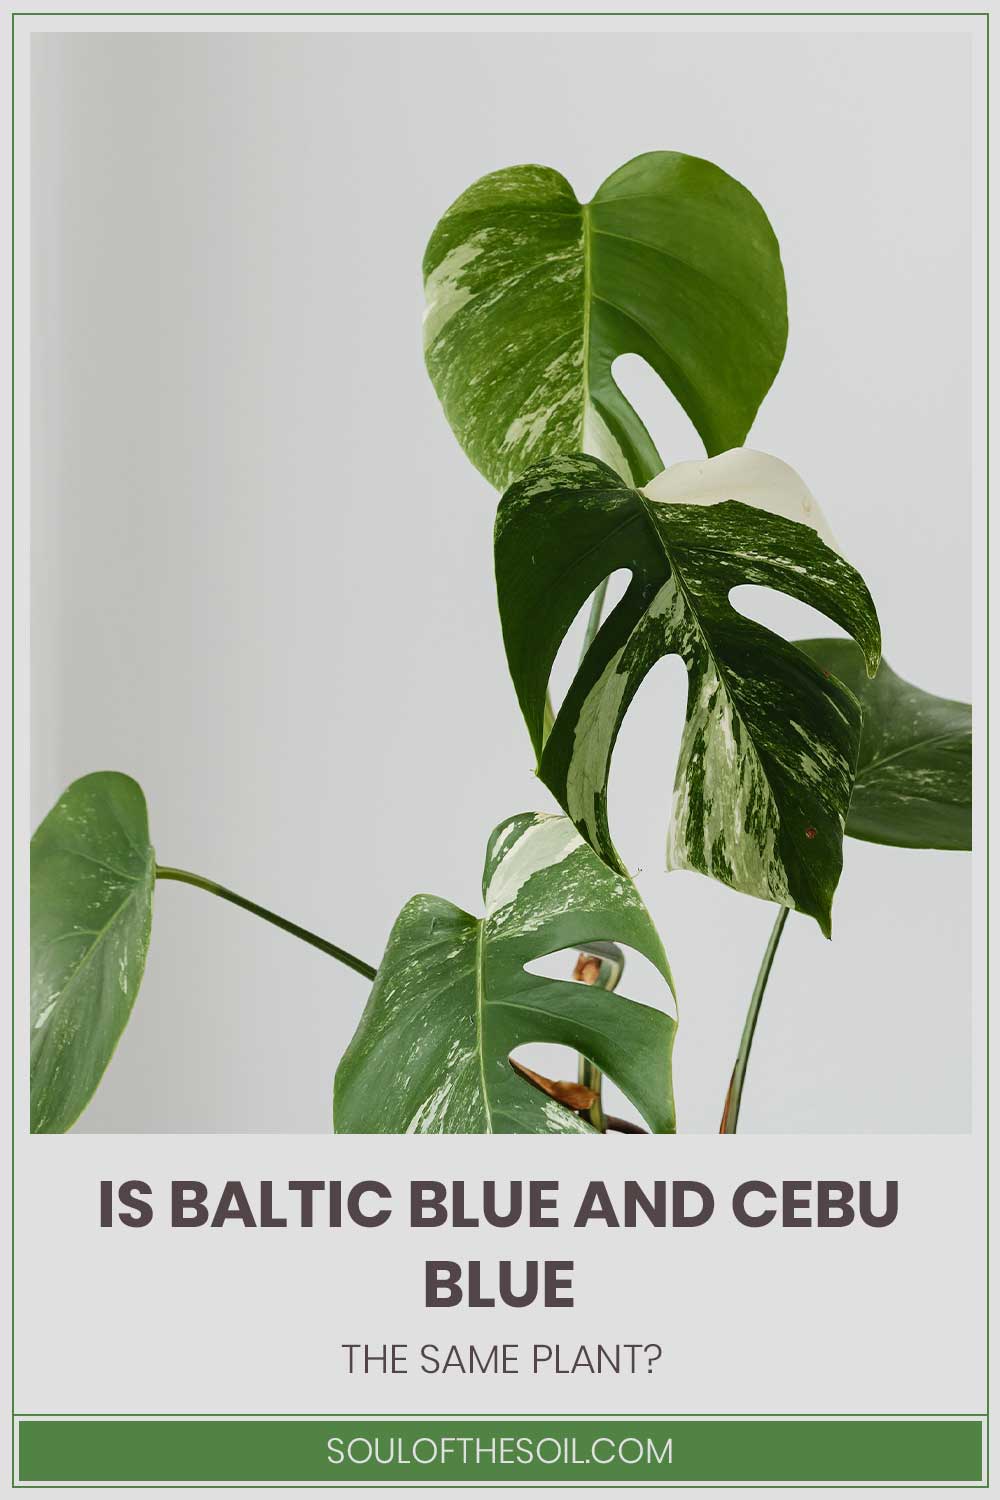 A baltic blue plant in front of a white wall - Is Baltic Blue And Cebu Blue The Same Plant?